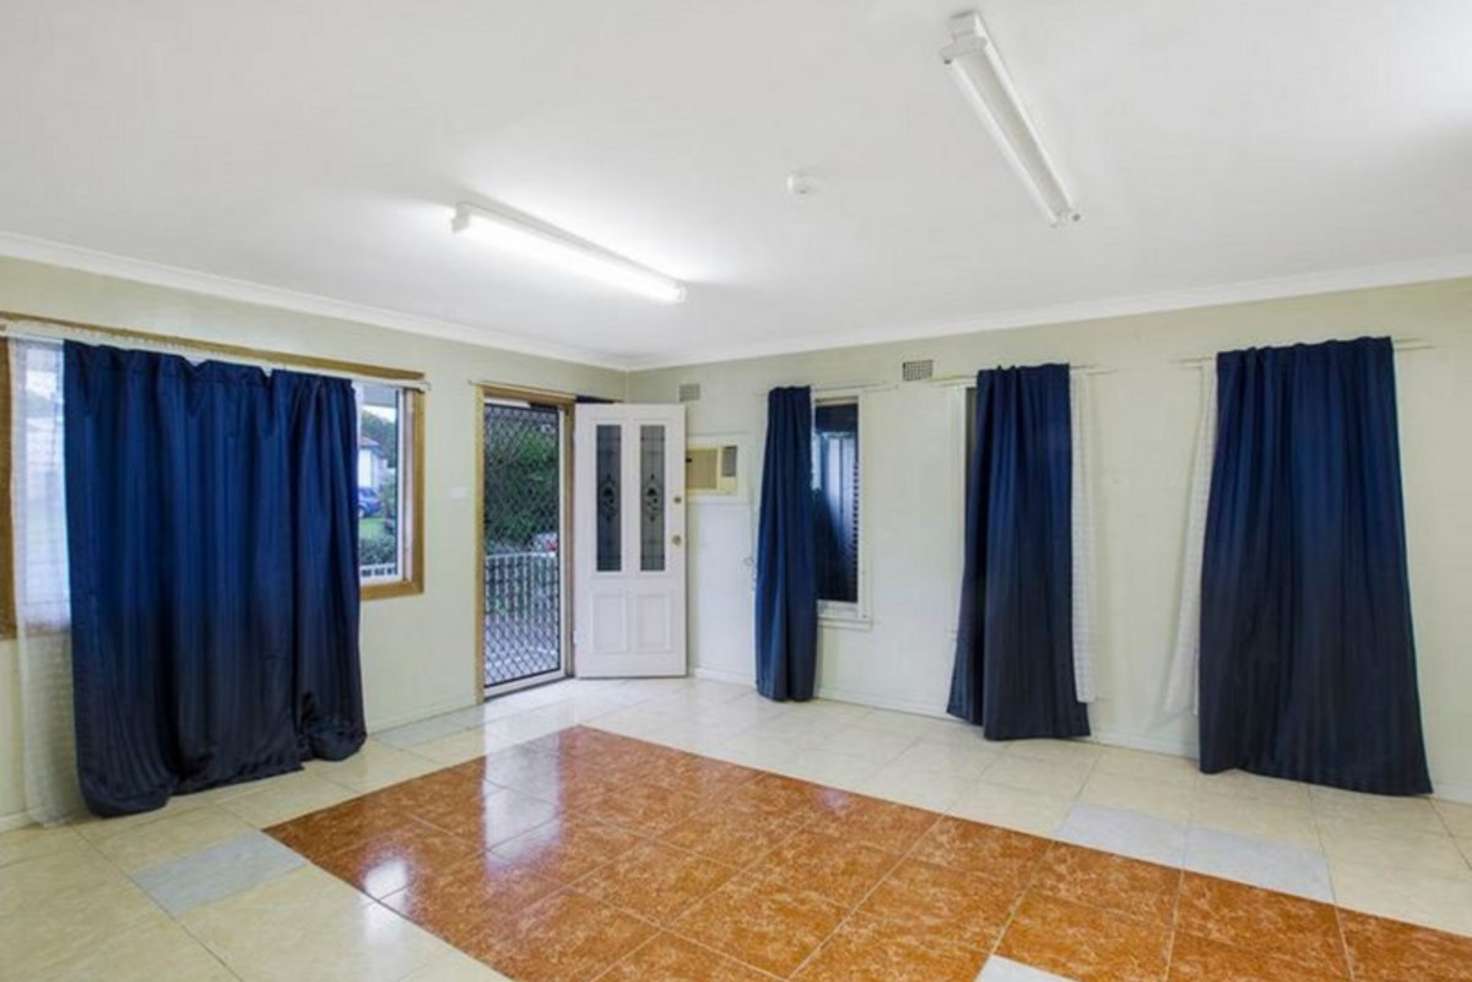 Main view of Homely house listing, 30 Kista Dan Avenue, Tregear NSW 2770